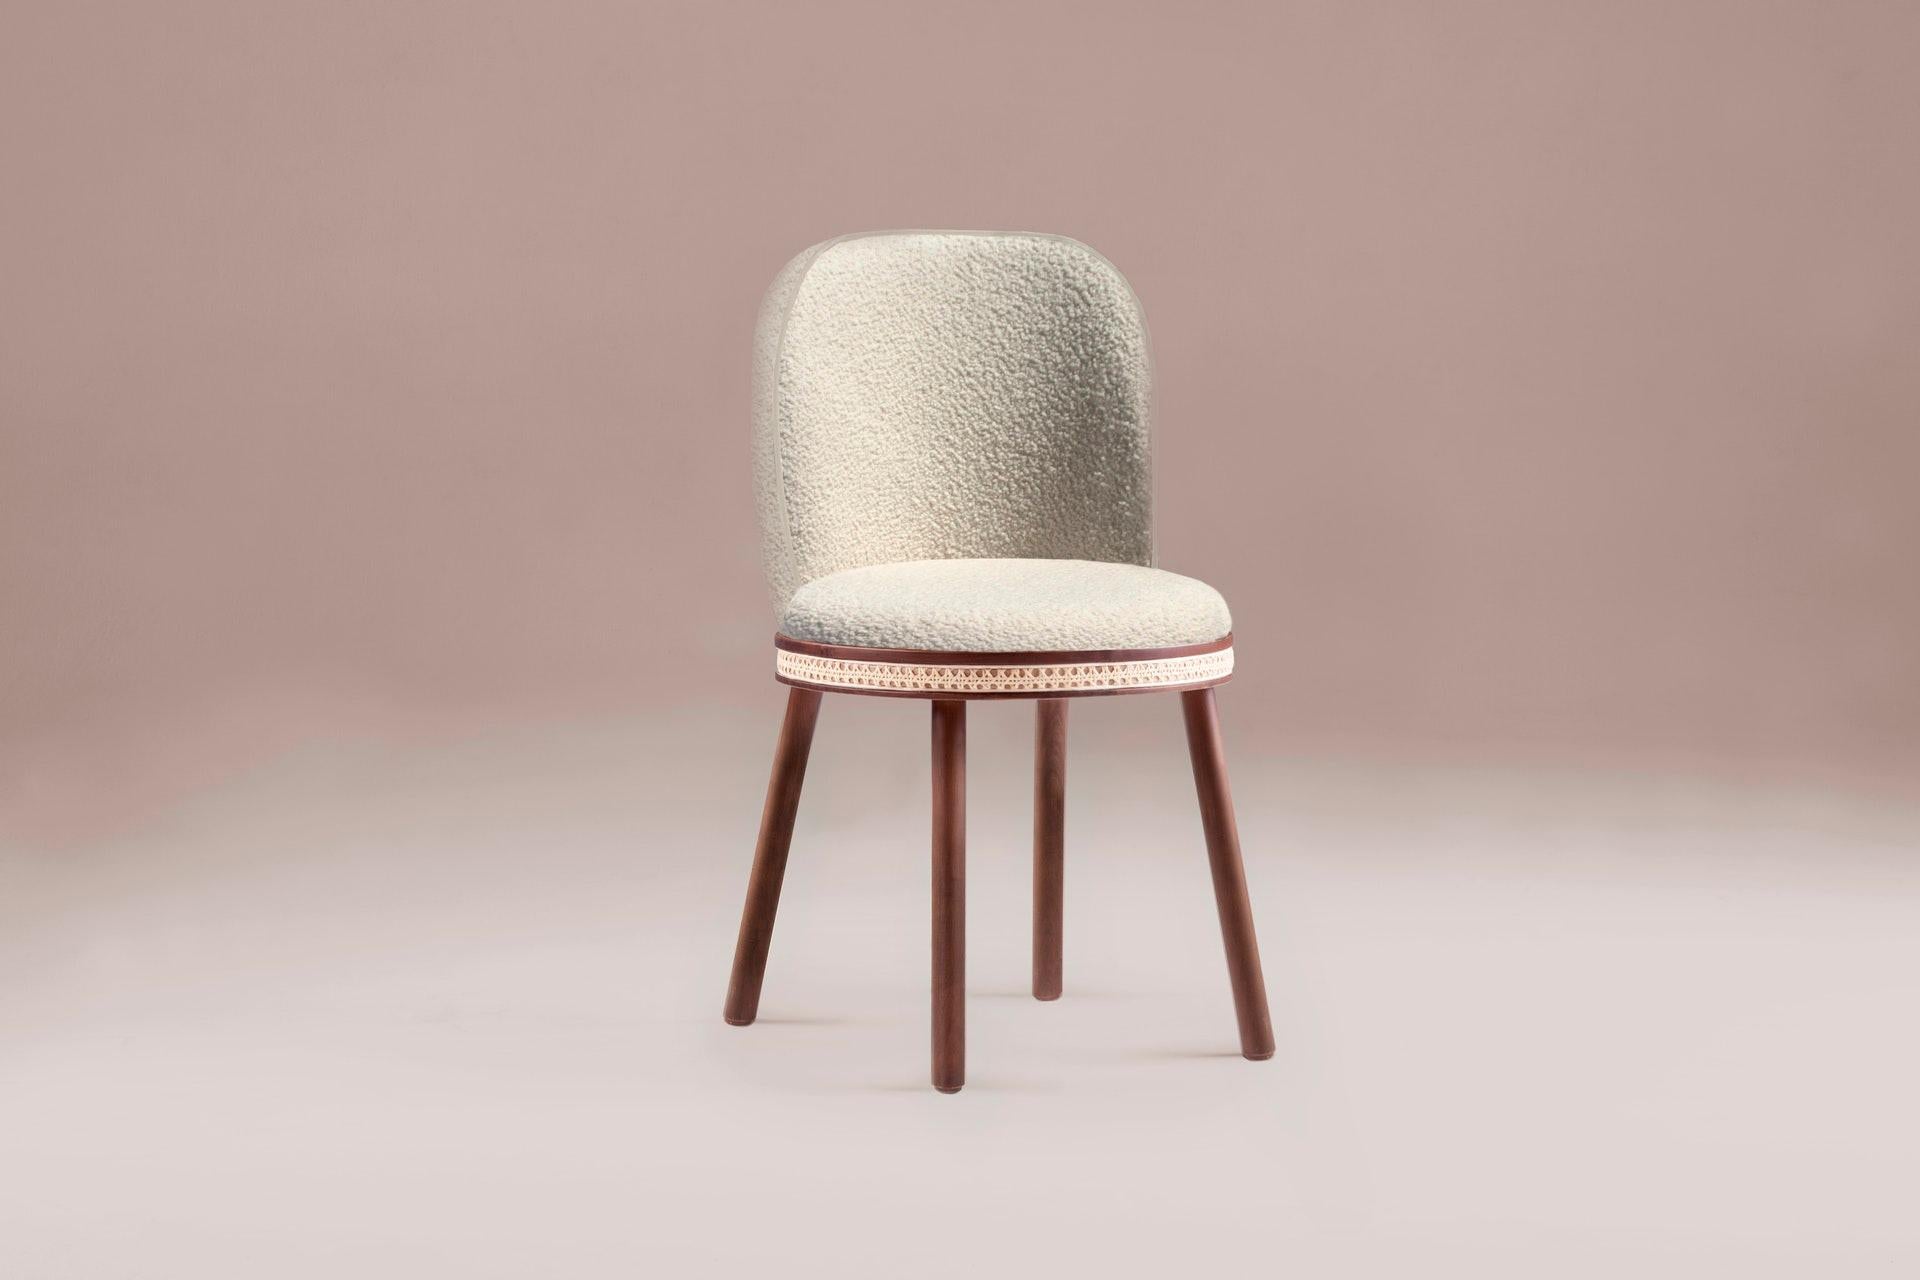 Chair, Alma by Dooq
Measures: W 51 cm 20”
D 53 cm 21”
H 86 cm 34”
Seat height 49 cm 19”

Materials: Upholstery fabric or leather; structure solid wood feet lacquered MDF or solid wood rattan natural rattan. COM with natural walnut or natural